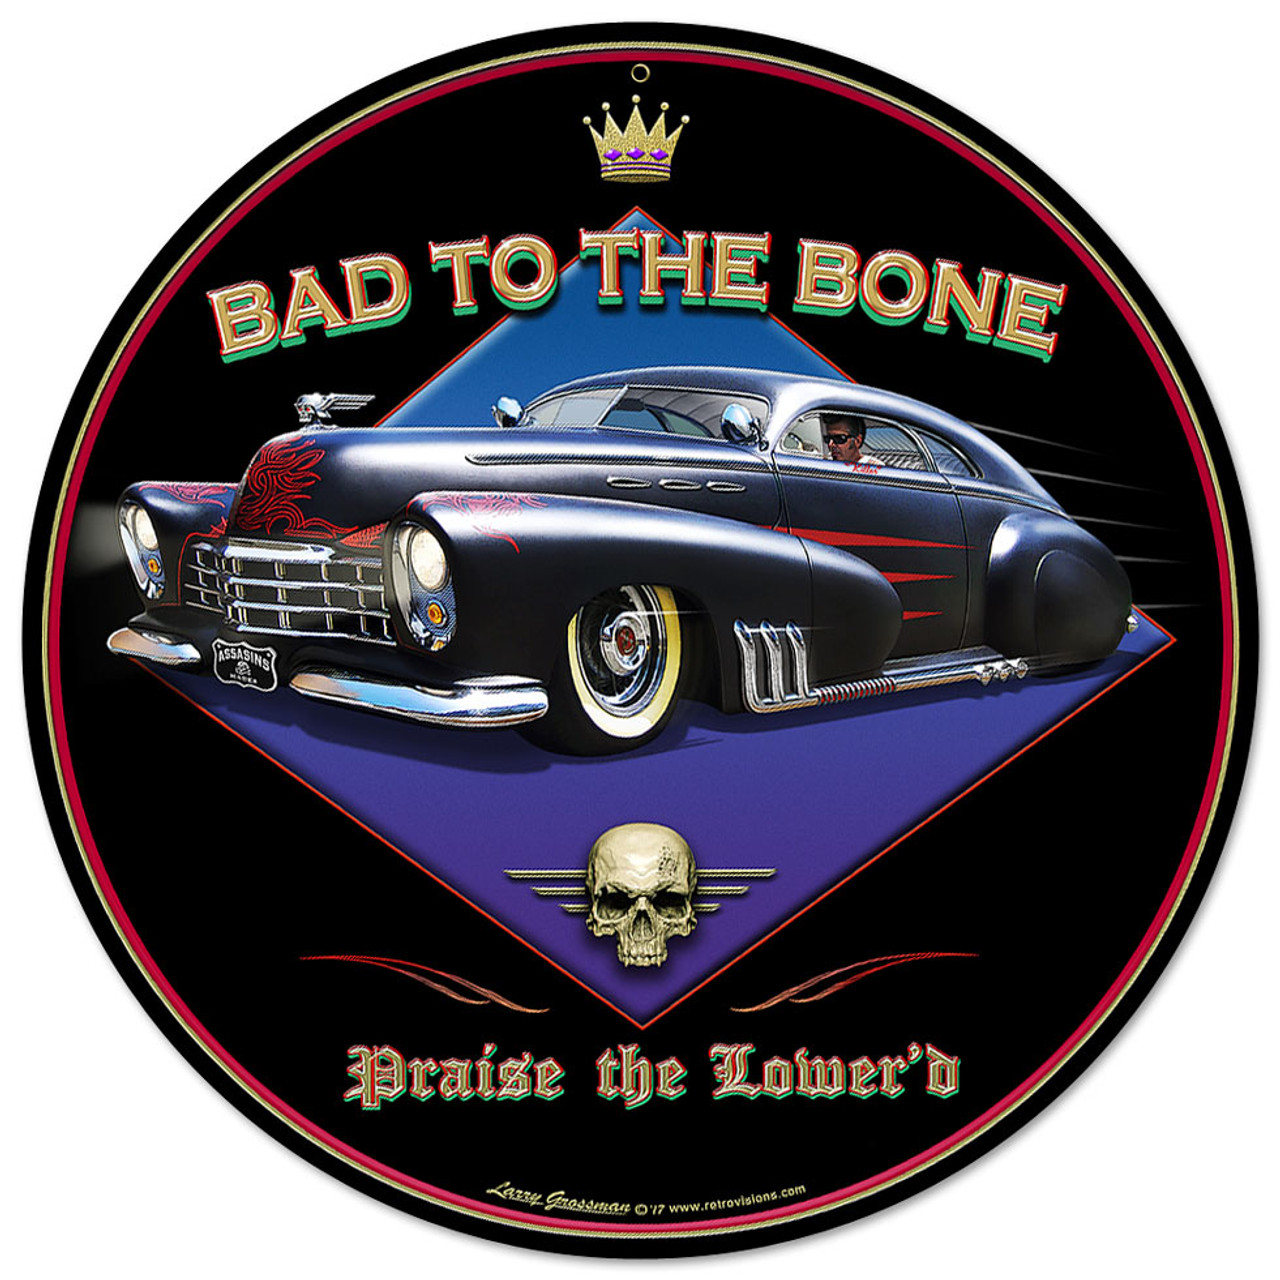 Bad To The Bone Metal Sign 14 x 14 Inches